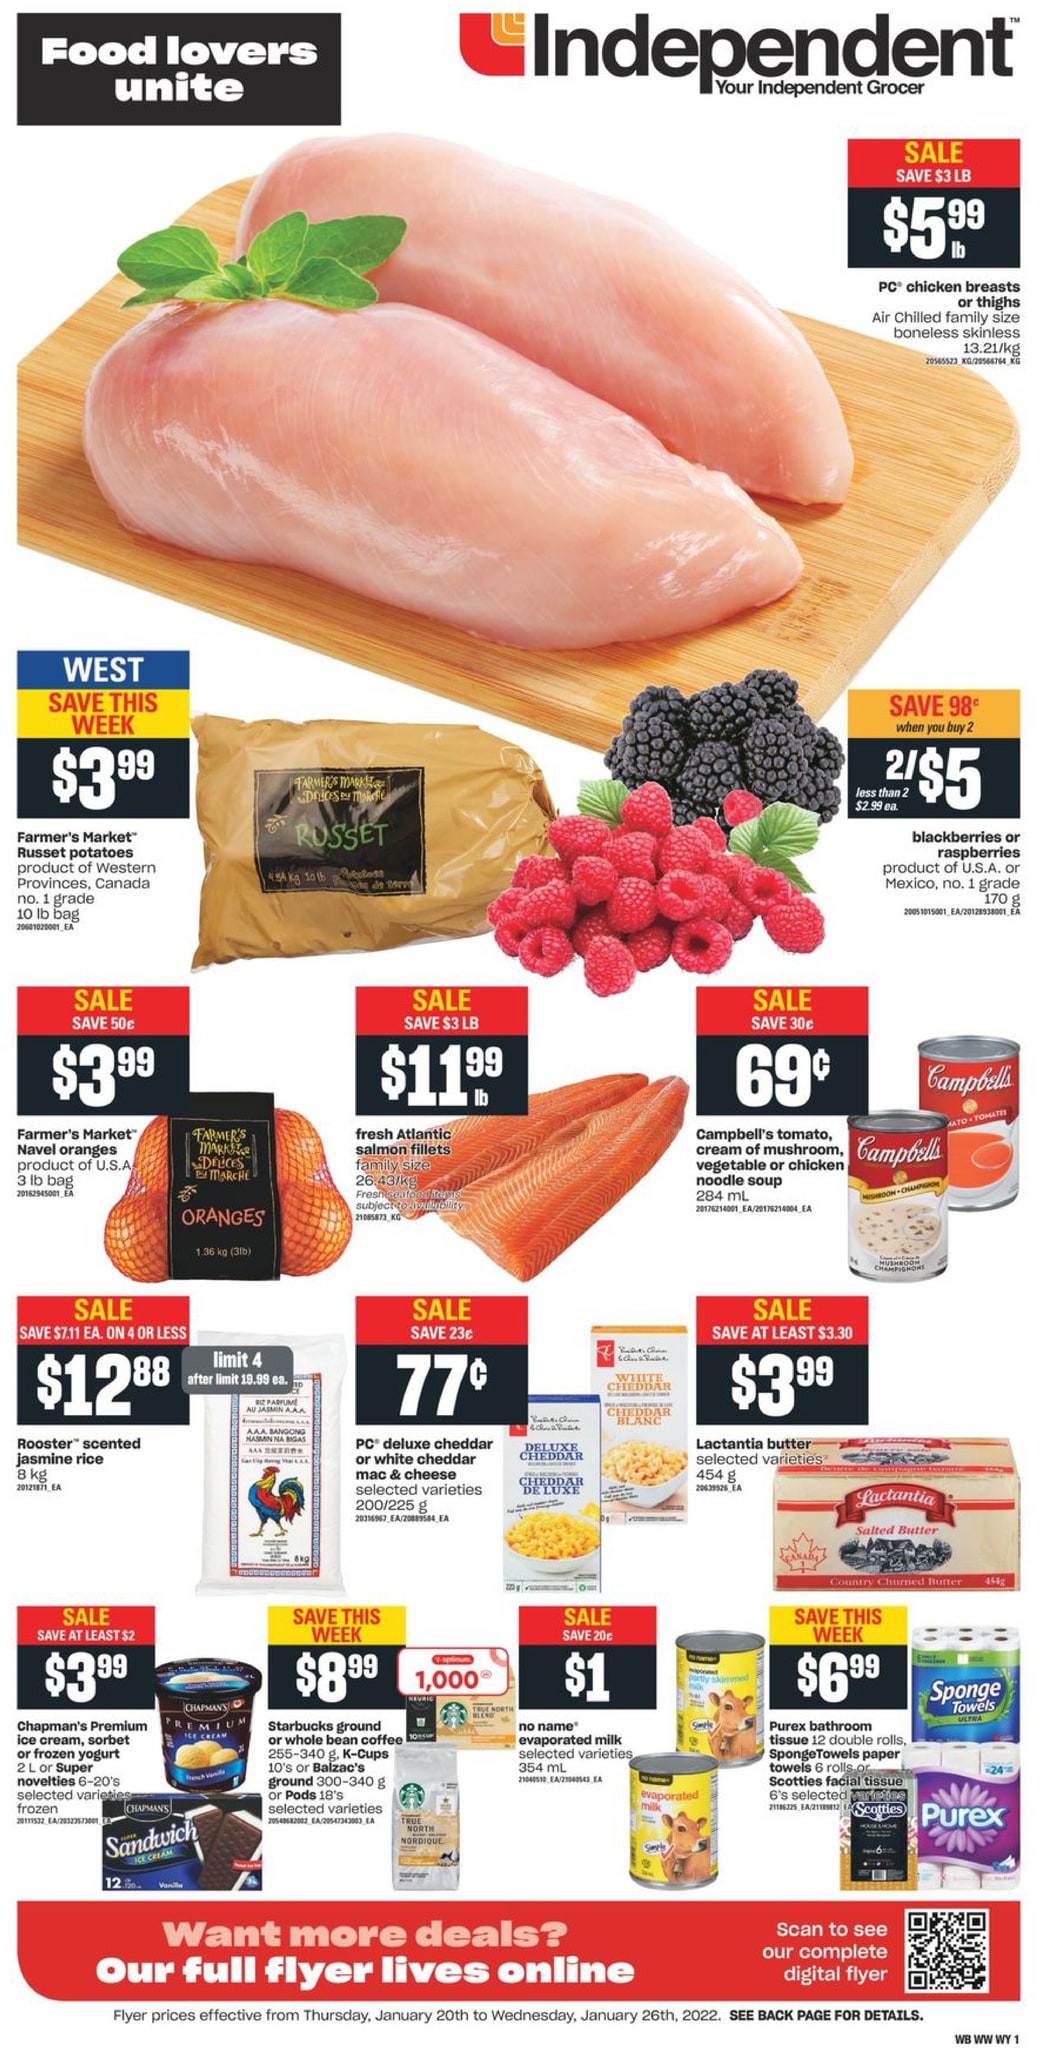 Independent British Columbia - Weekly Flyer Specials - Page 2